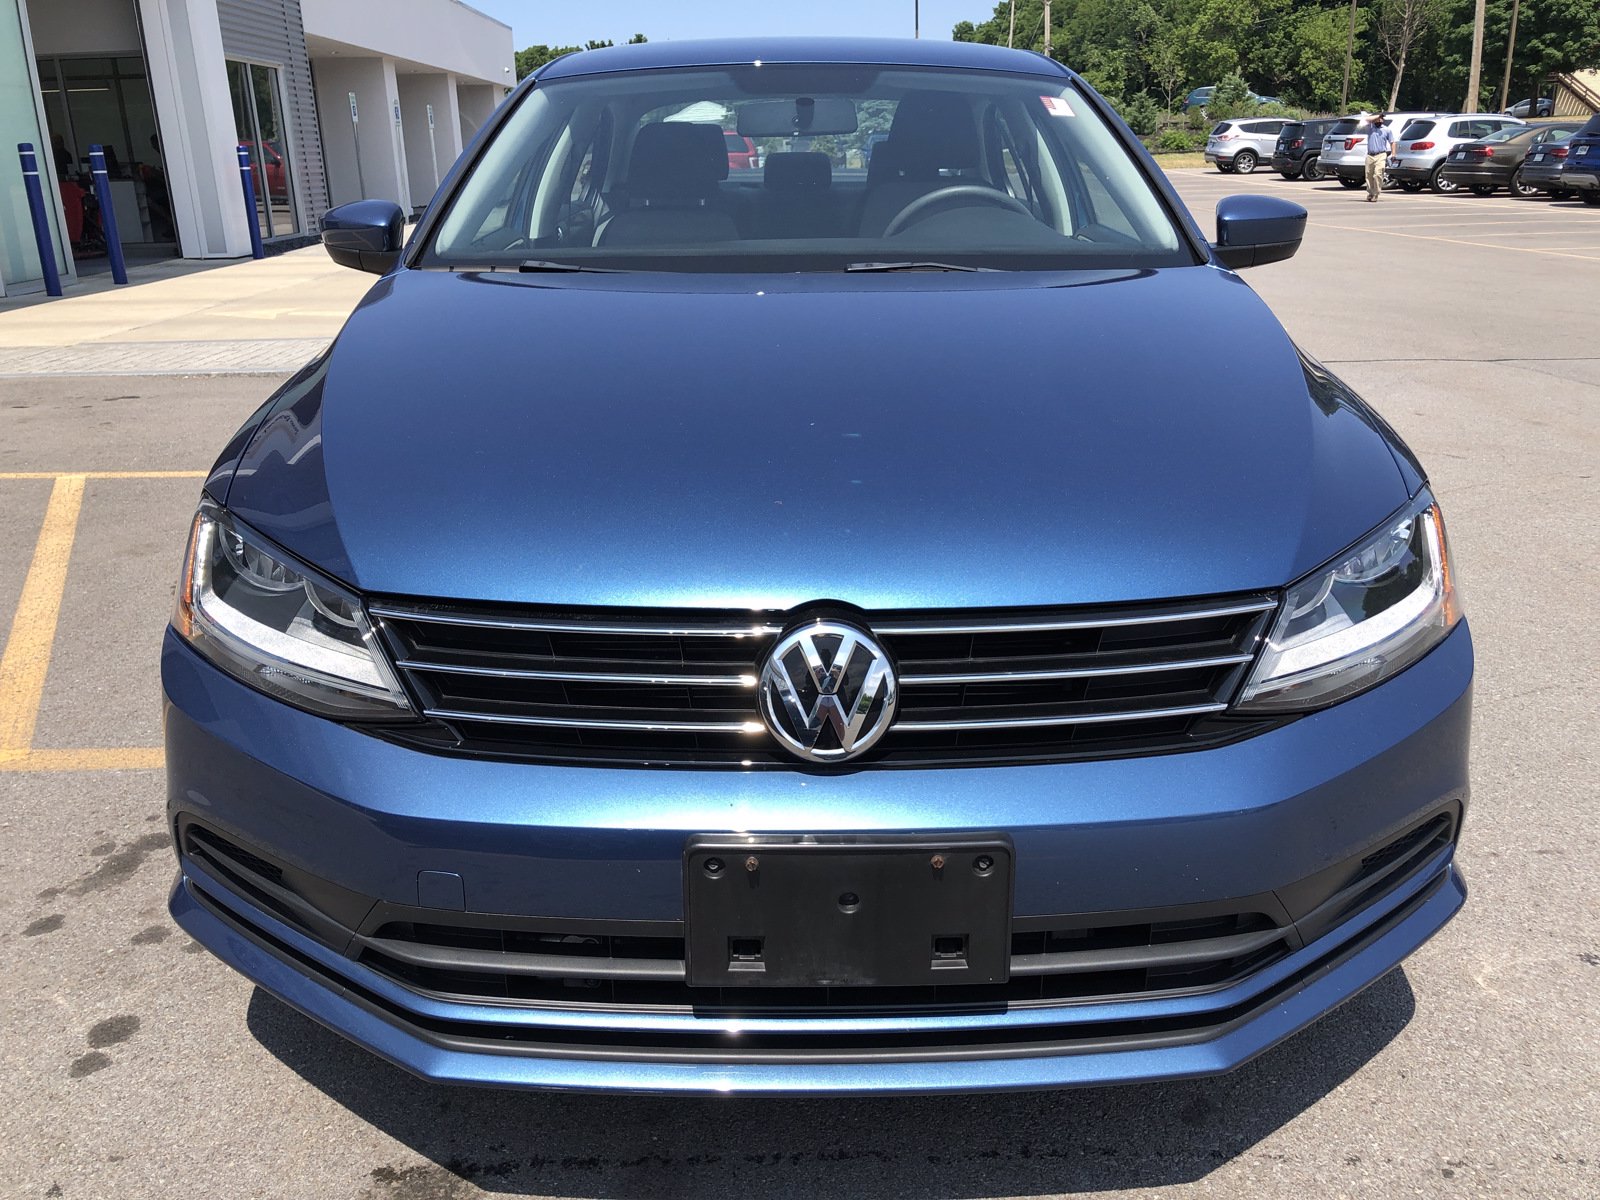 Certified PreOwned 2017 Volkswagen Jetta 1.4T S FWD 4dr Car